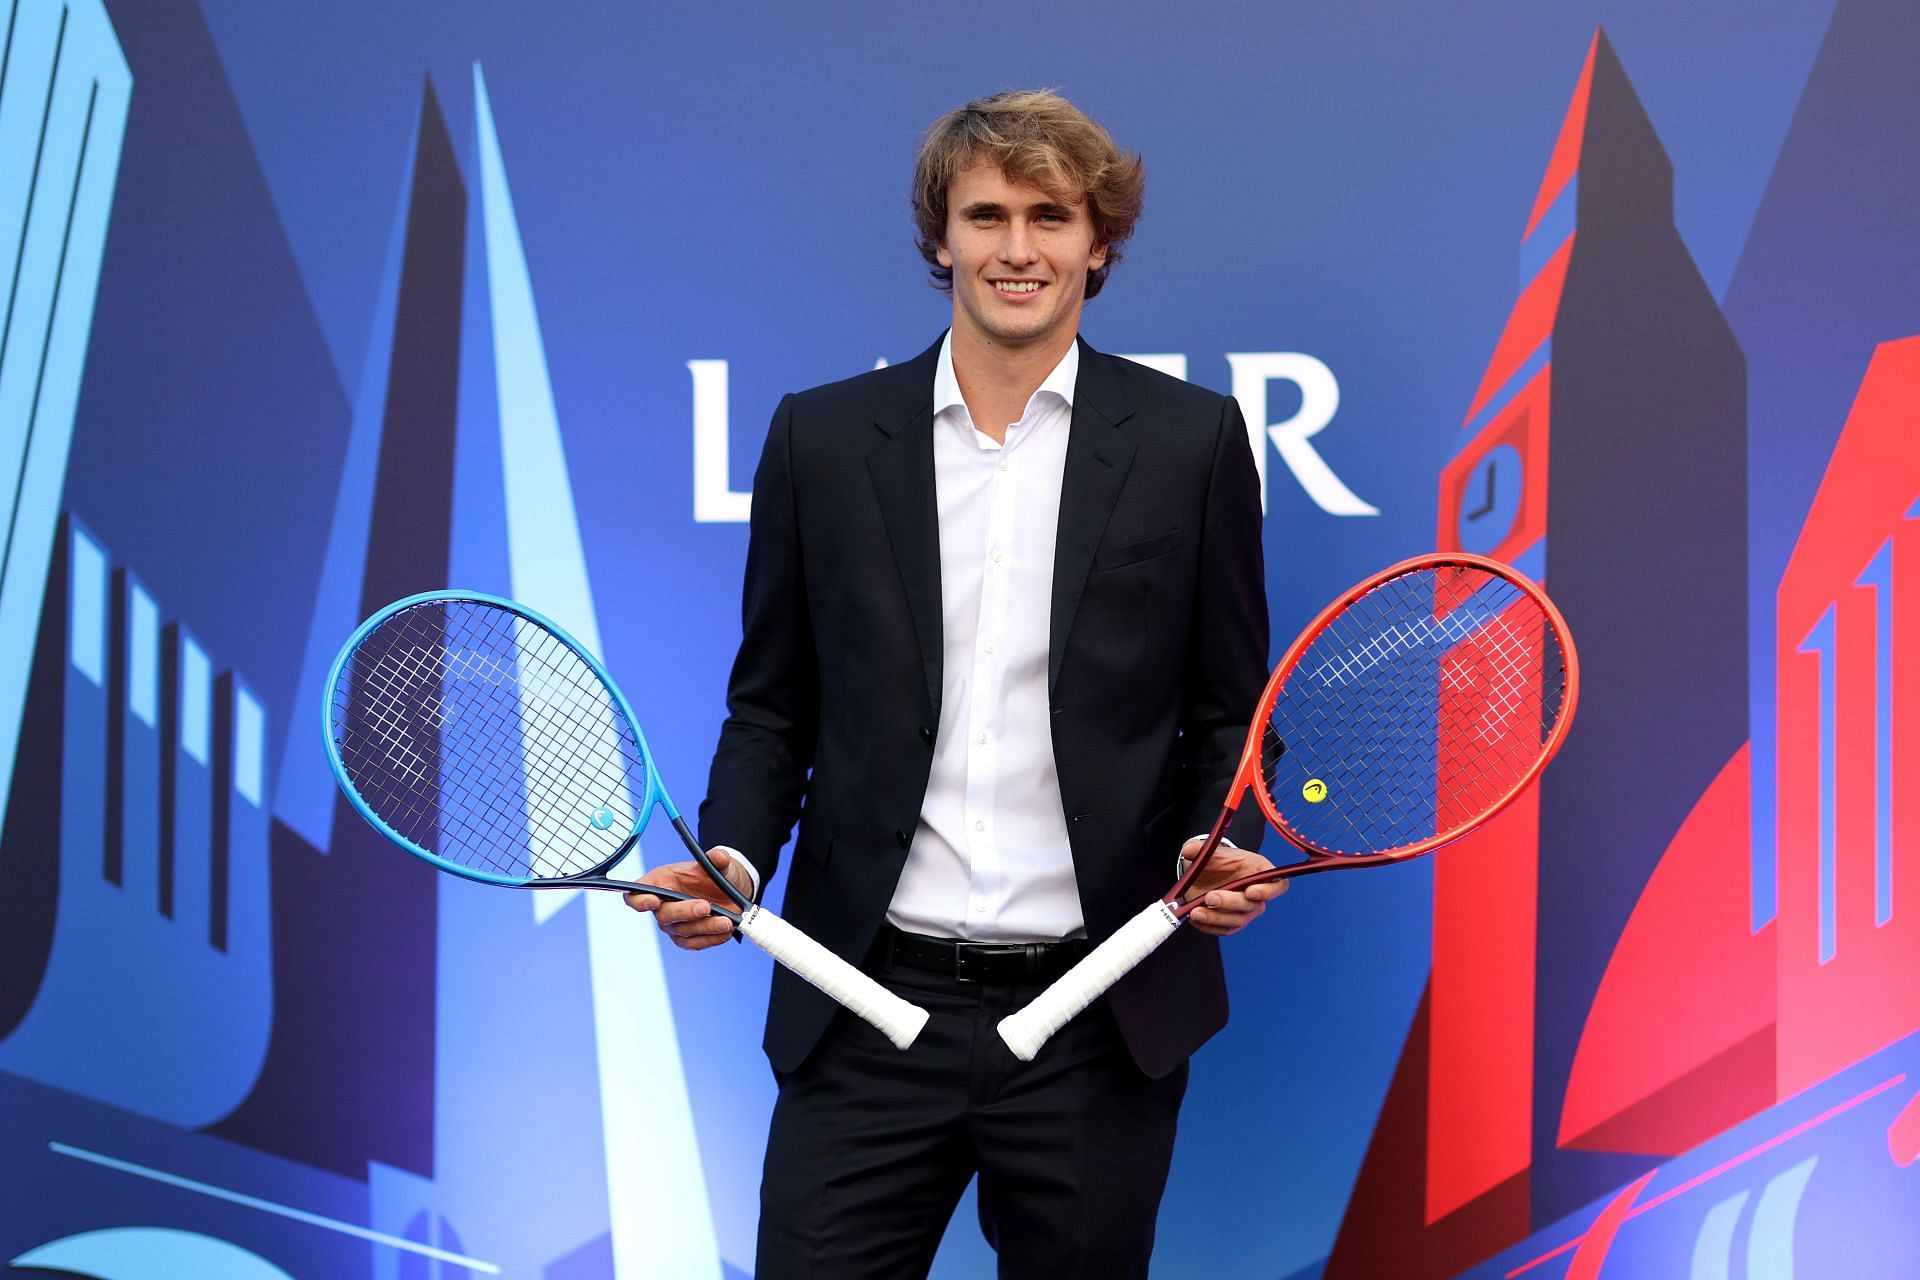 Alexander Zverev attended the 2022 Laver Cup